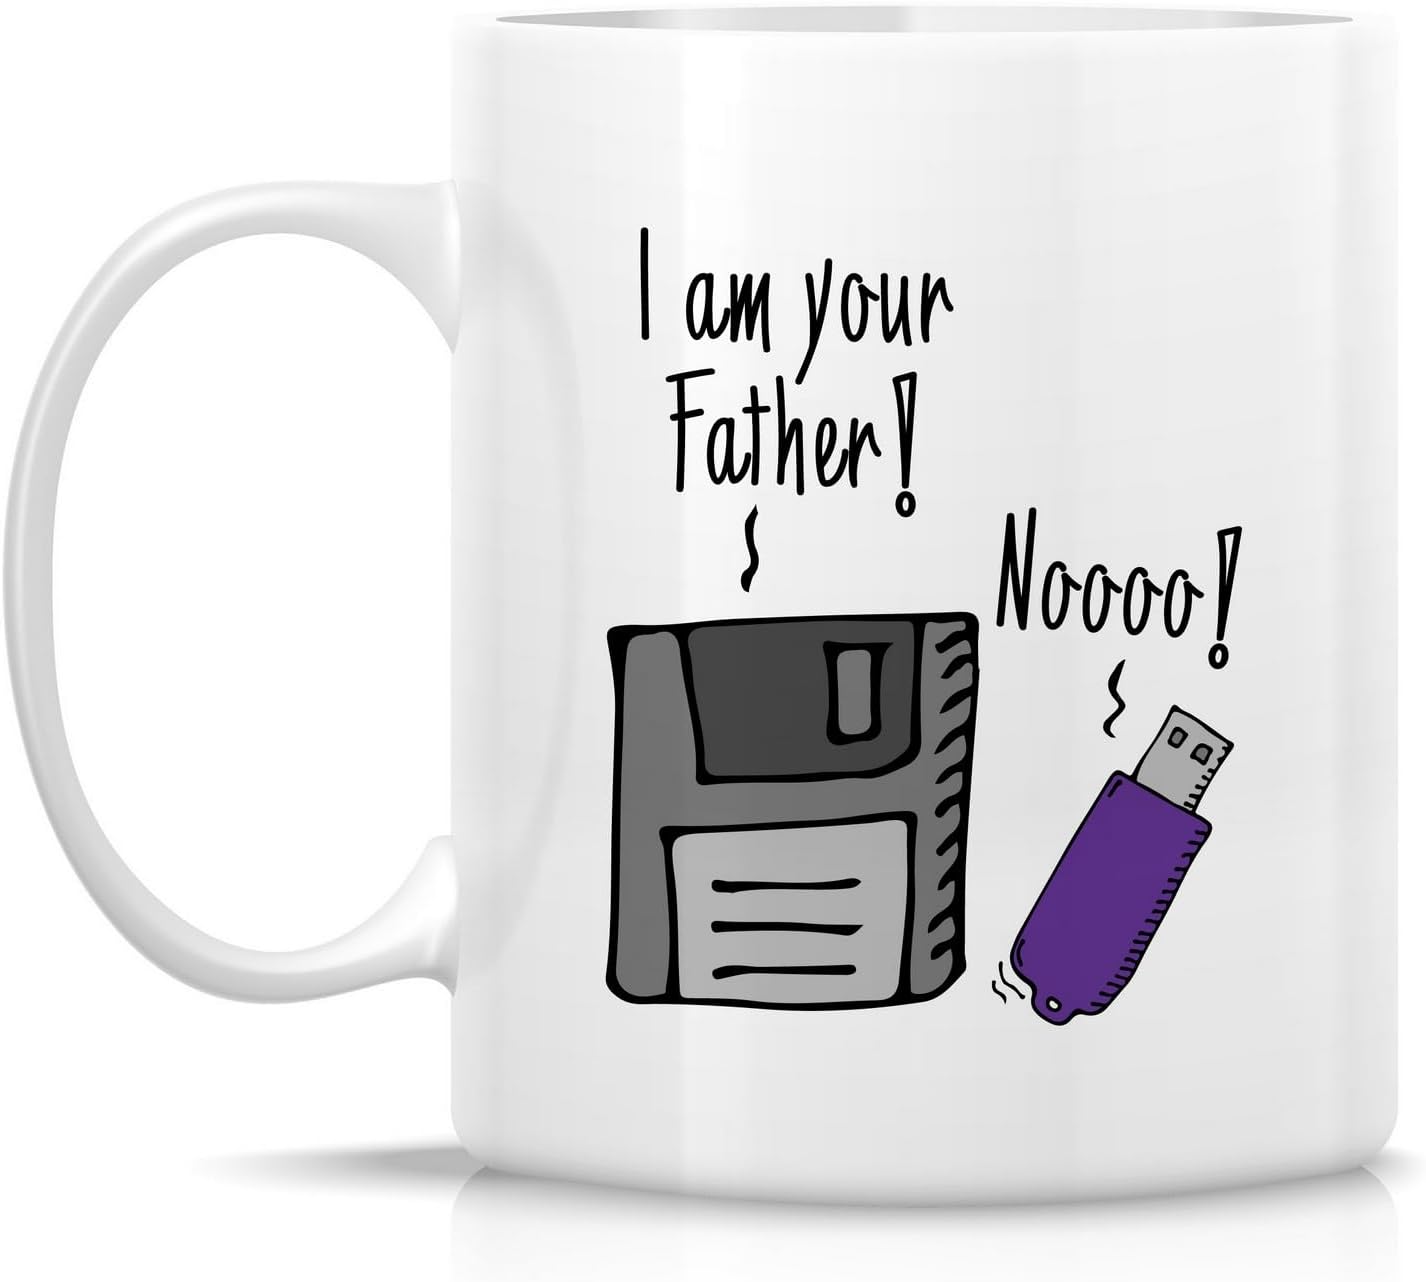 Retreez Funny Technical Tech Support Mug Gift IT Computer Geek Floppy Disk USB Drive 11 Oz Ceramic Coffee Mugs Review